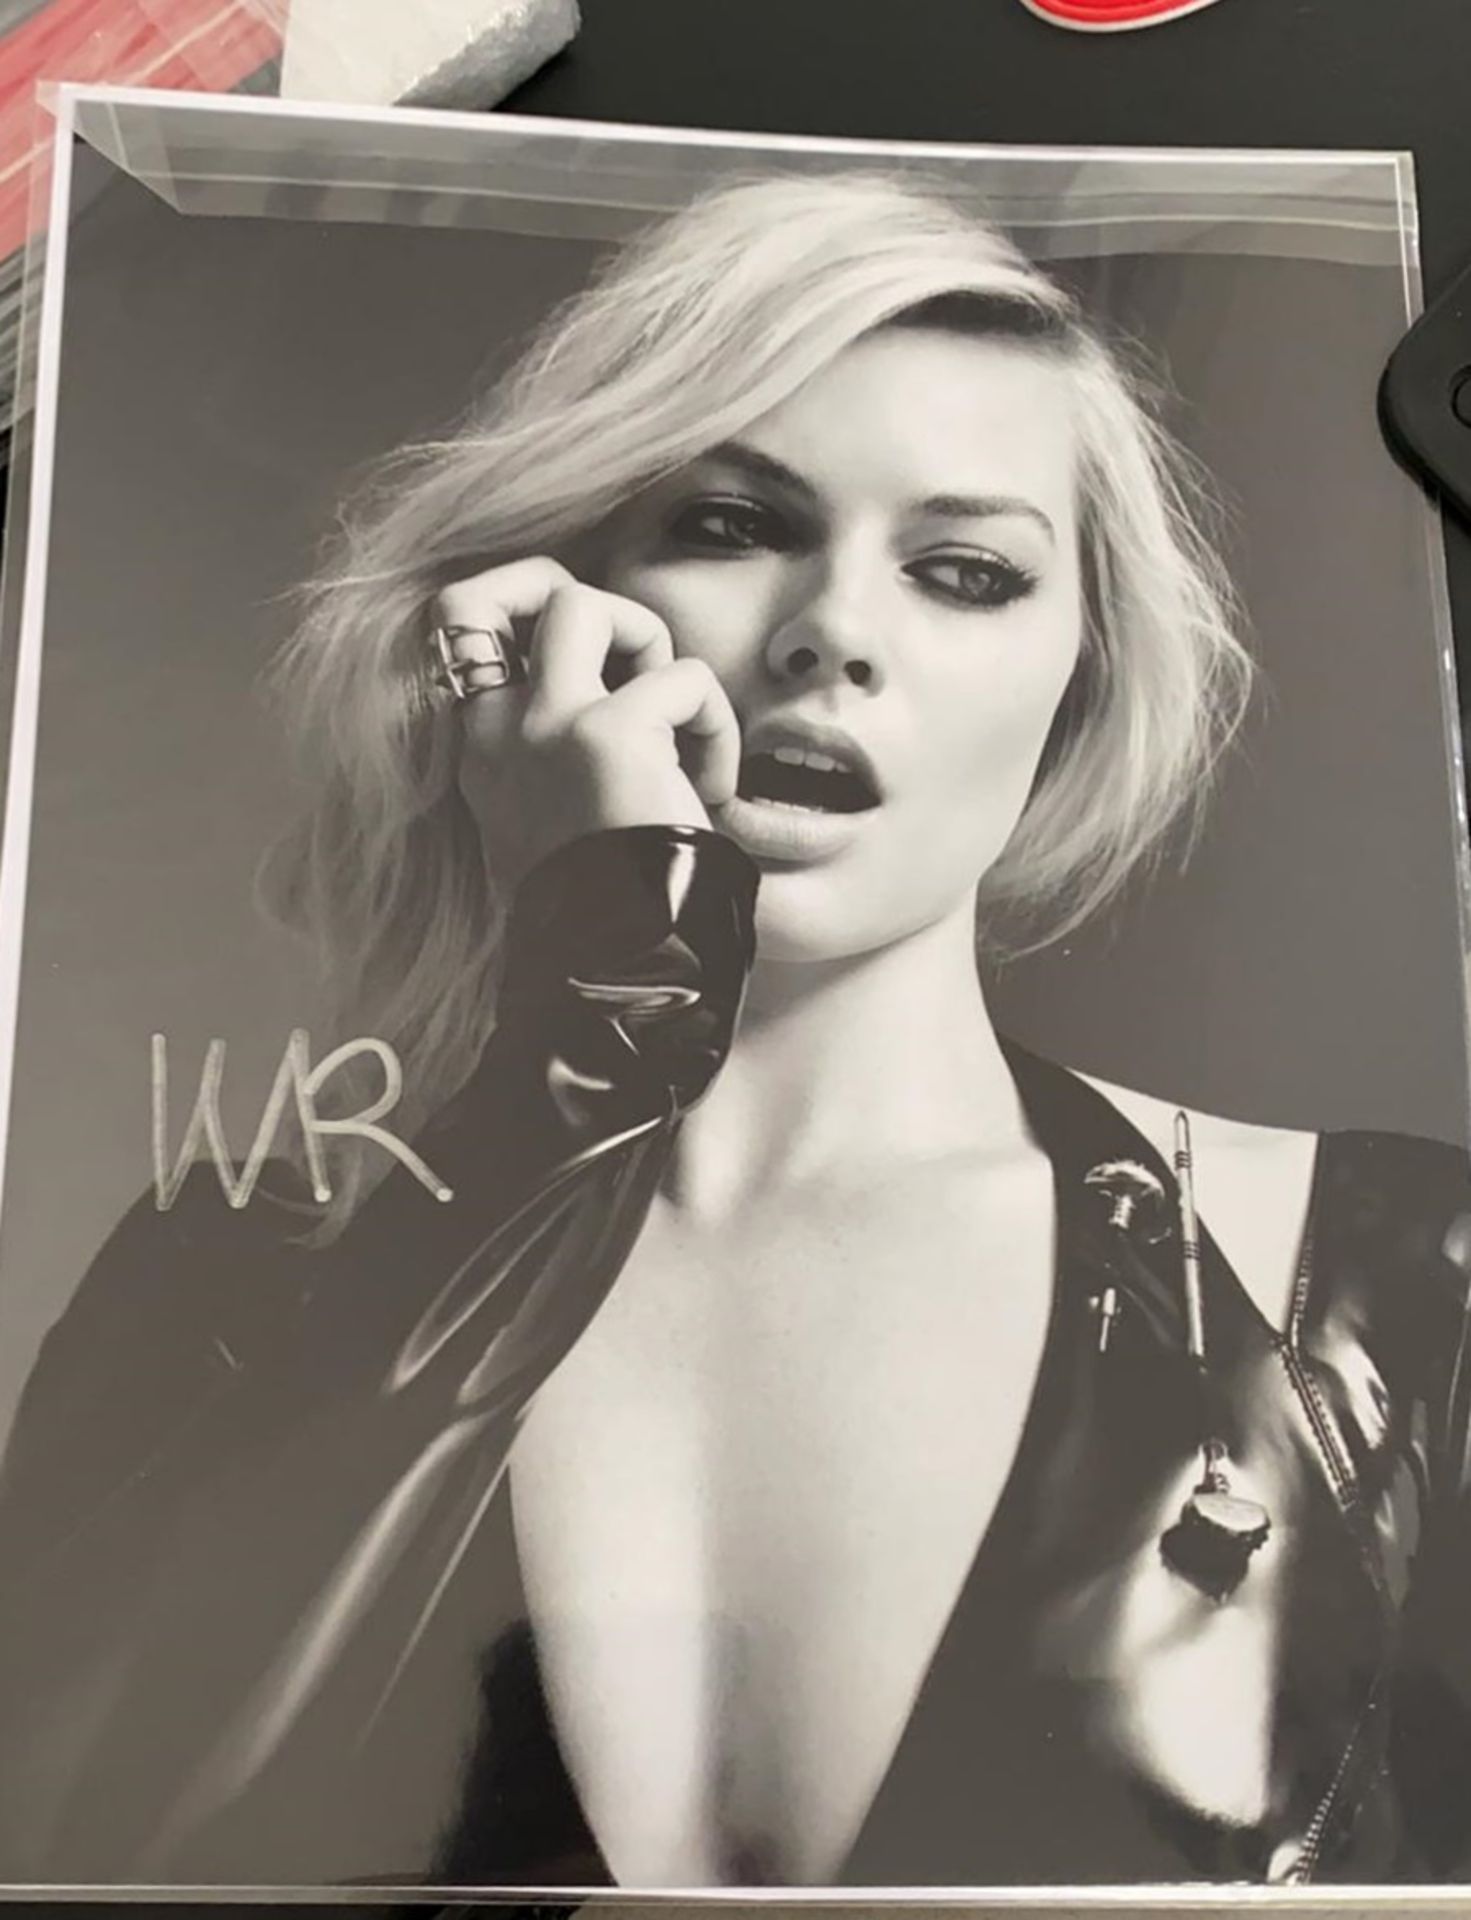 1 x Signed Autograph Picture - Margot Robbie - With COA - Size 10 x 8 Inch - CL590 - NO VAT ON THE